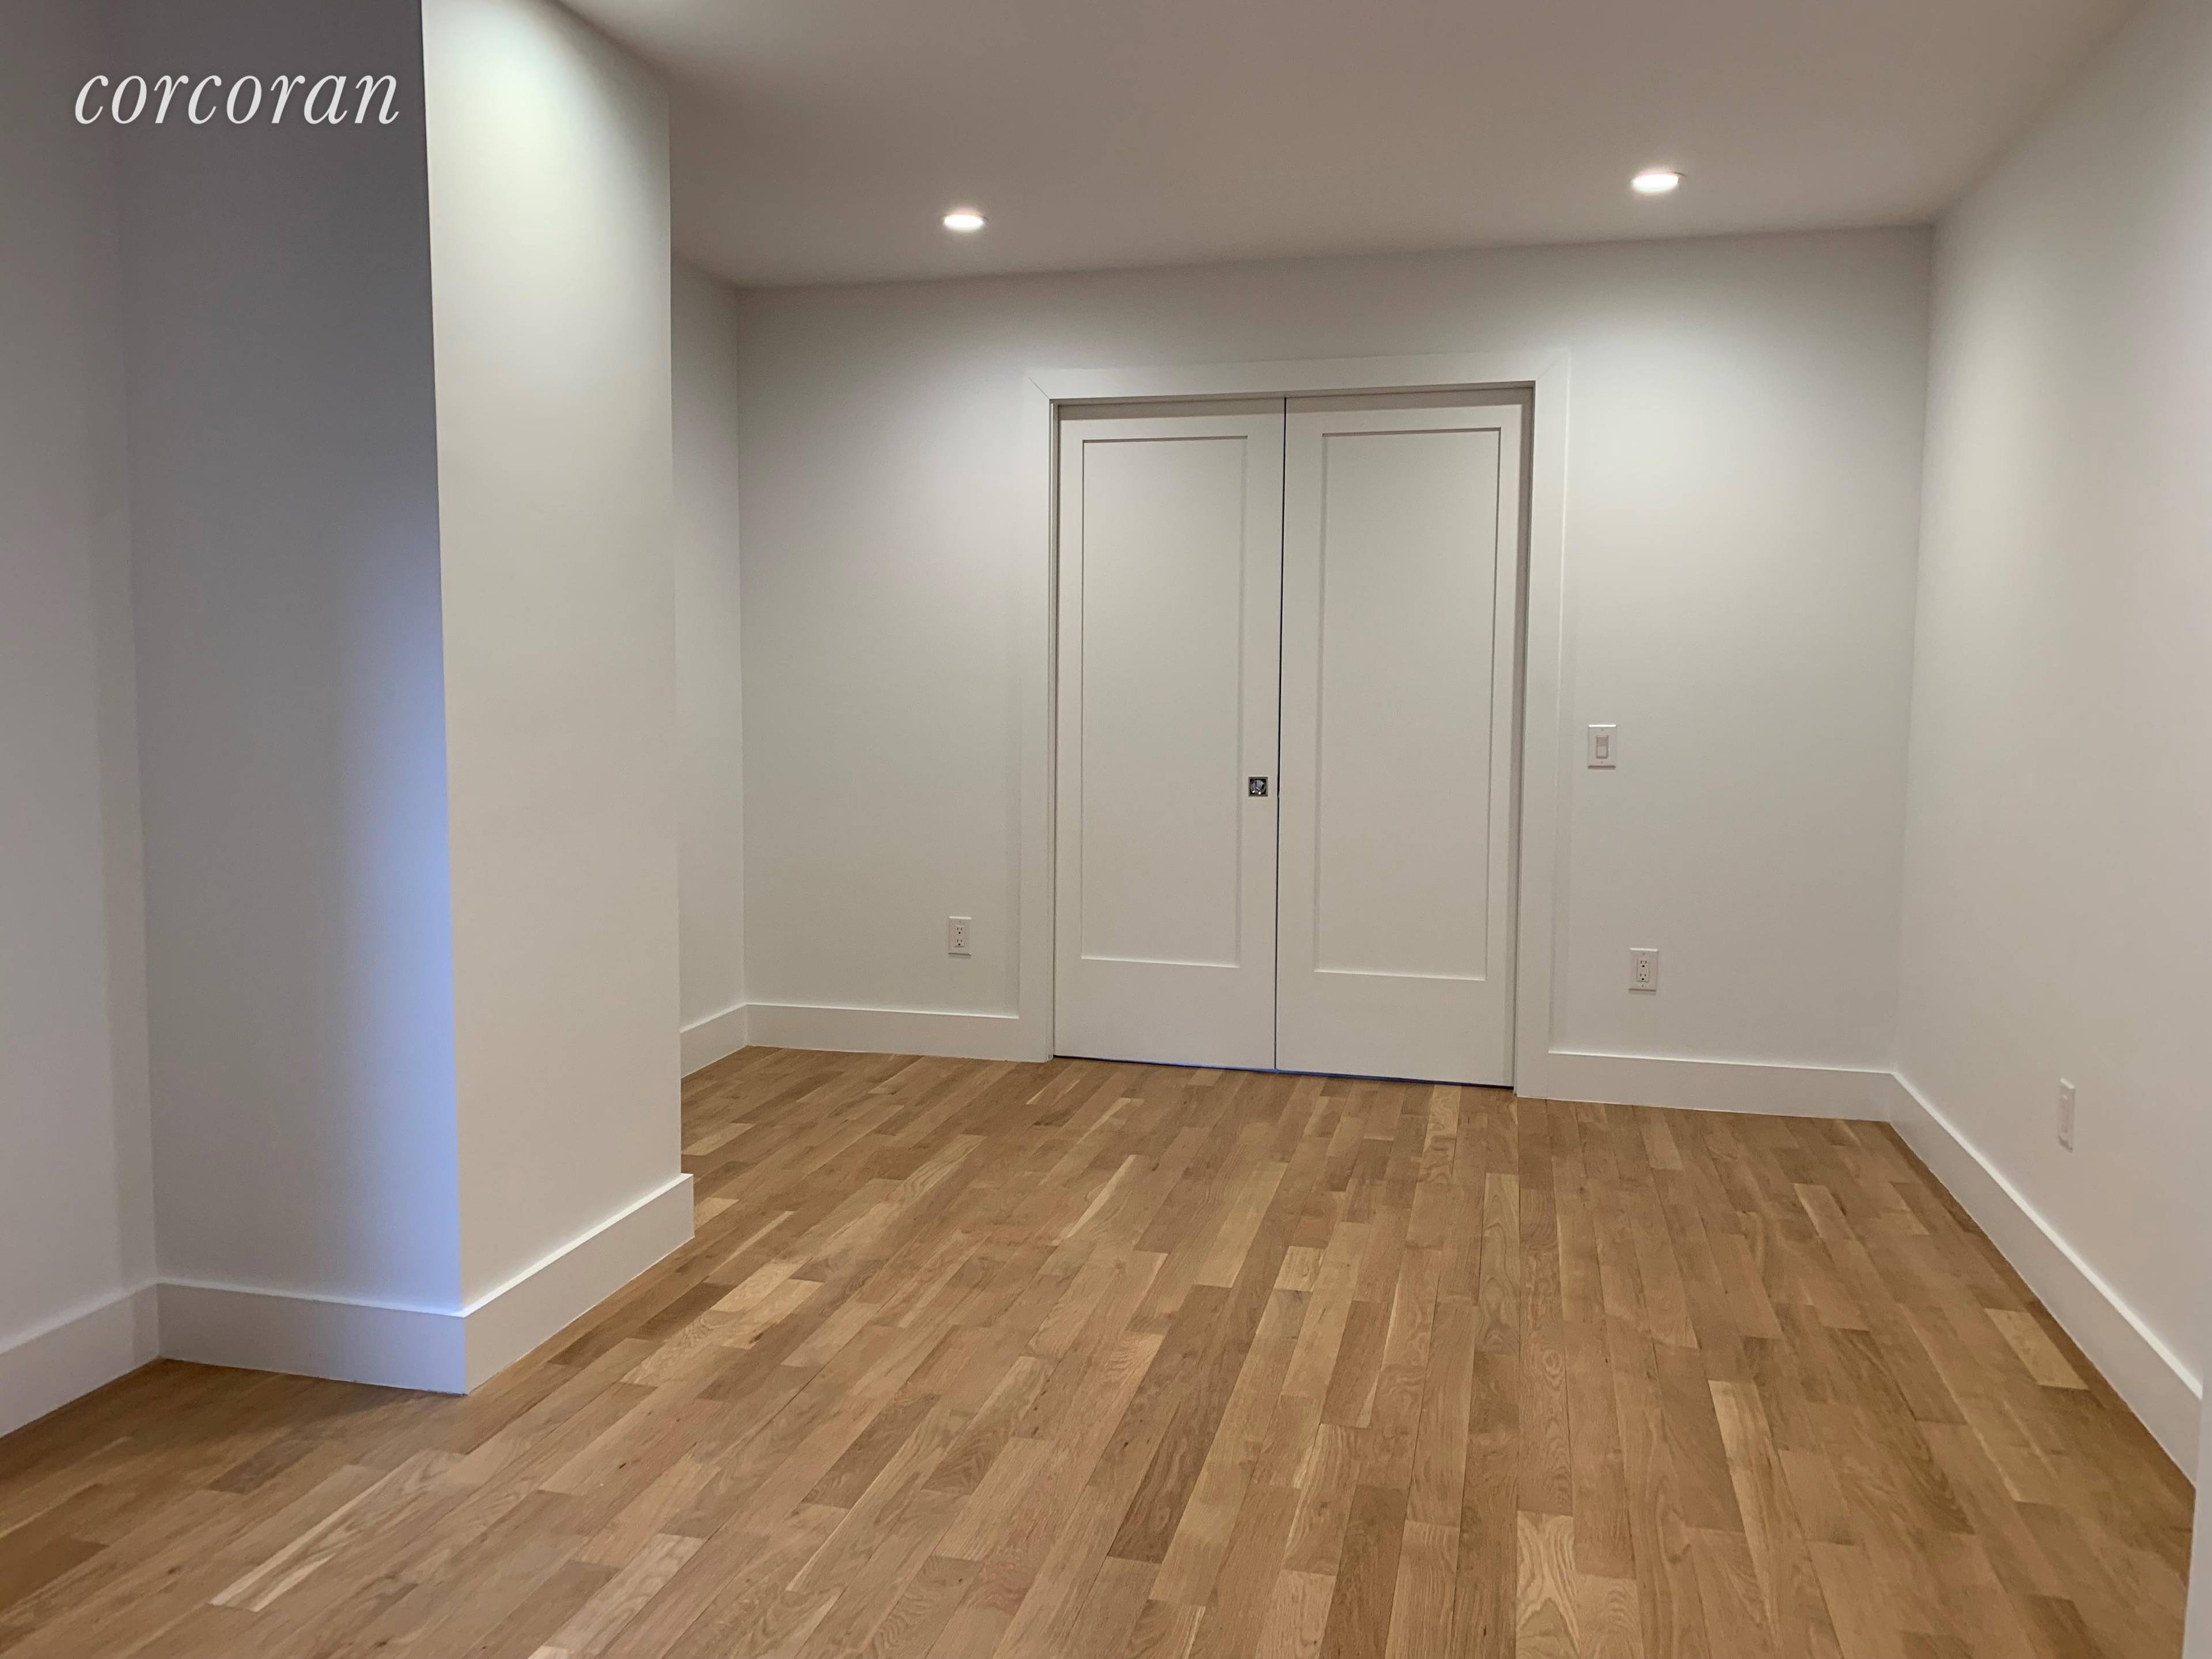 Gorgeous gut renovated 1 bedroom.